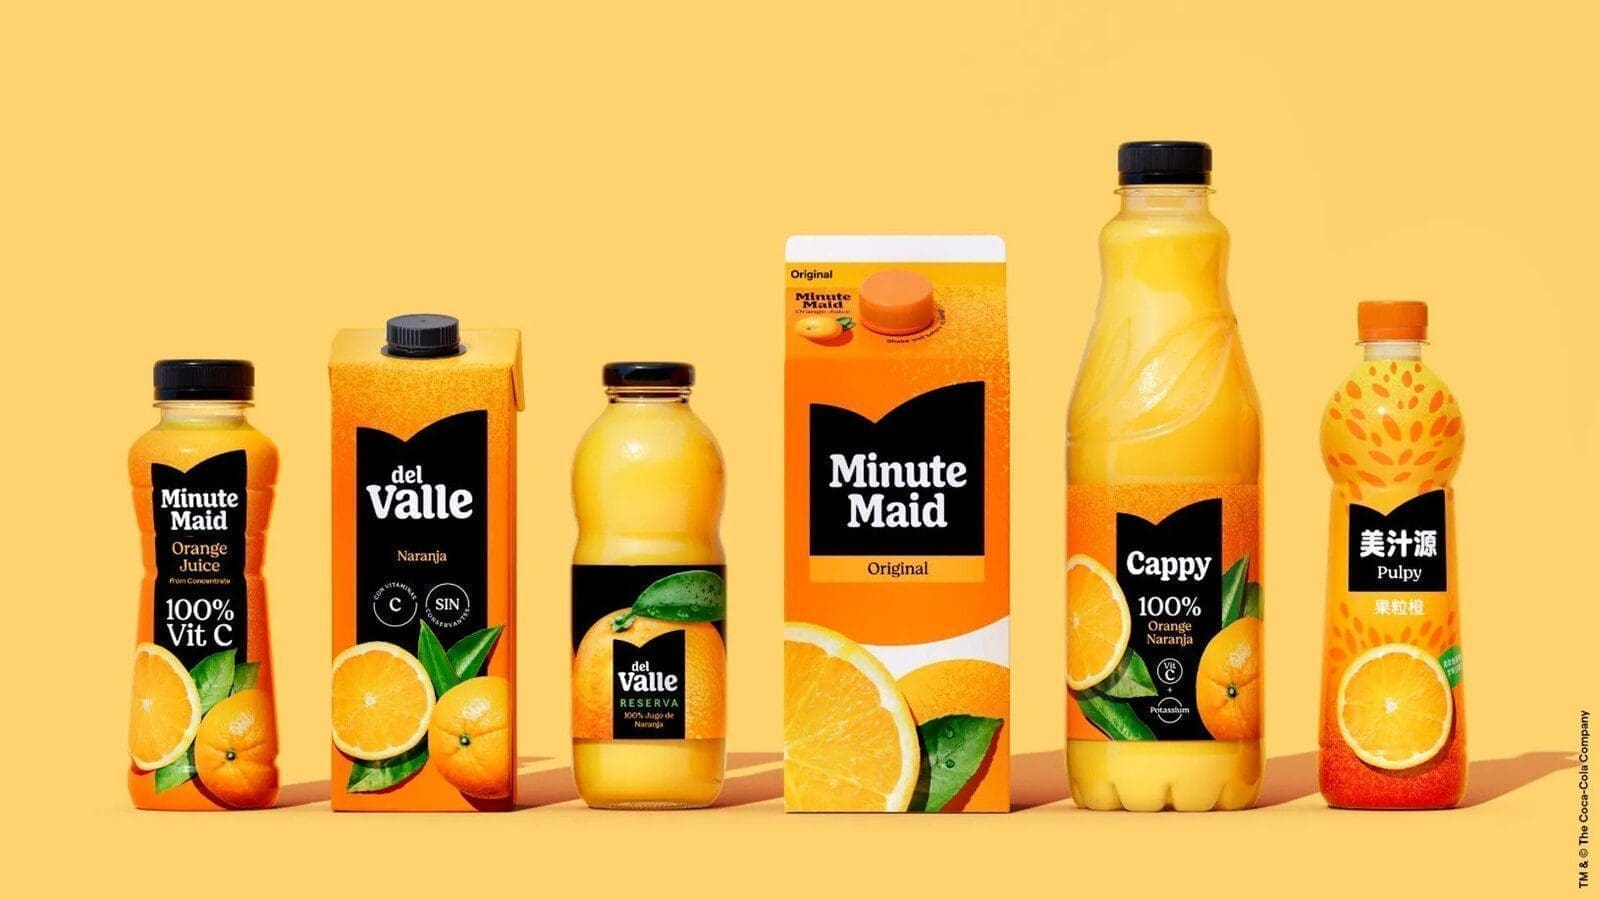 Coca-Cola rebrands Minute Maid for the first time in juice brand’s 75-year history